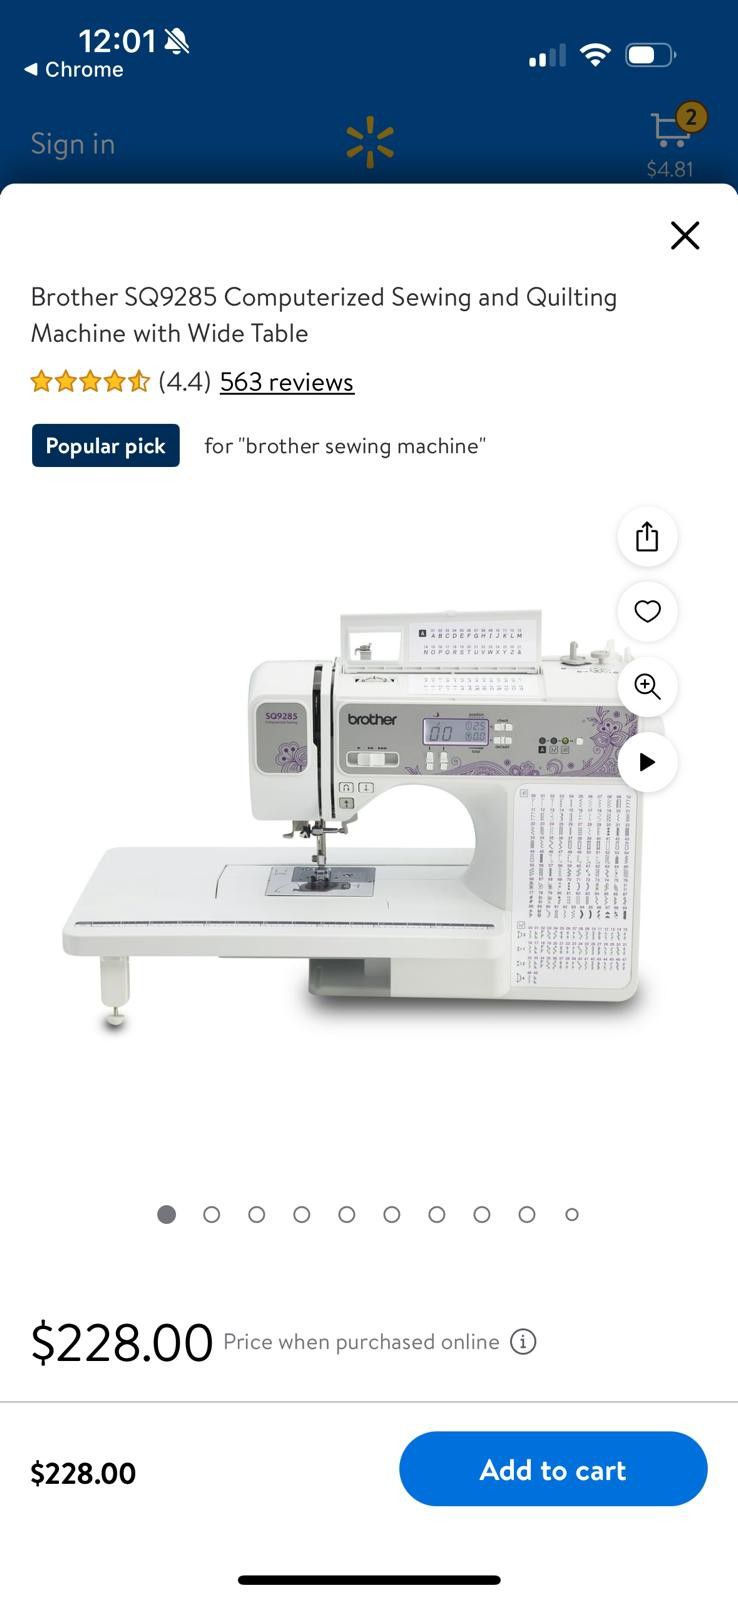 Brother SQ9285 Computerized Sewing And Quilting Machine With Wide Table